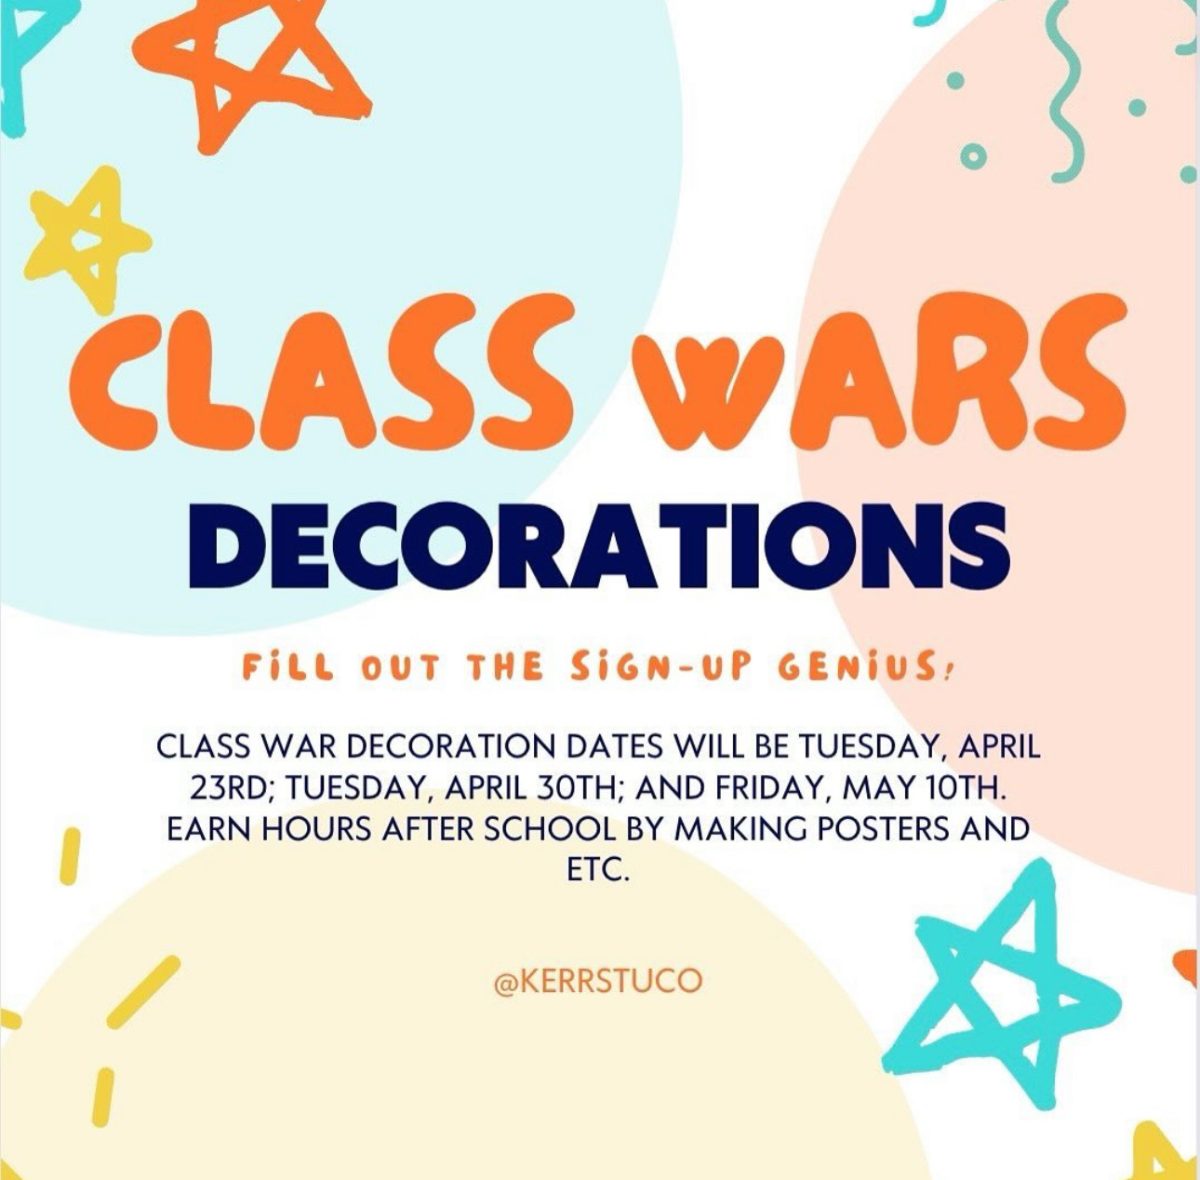 Class Wars Decorations! The Student Council Officers advertise their afterschool dates for members to help prepare for class wars. By participating, members can earn STUCO points as well as hours.